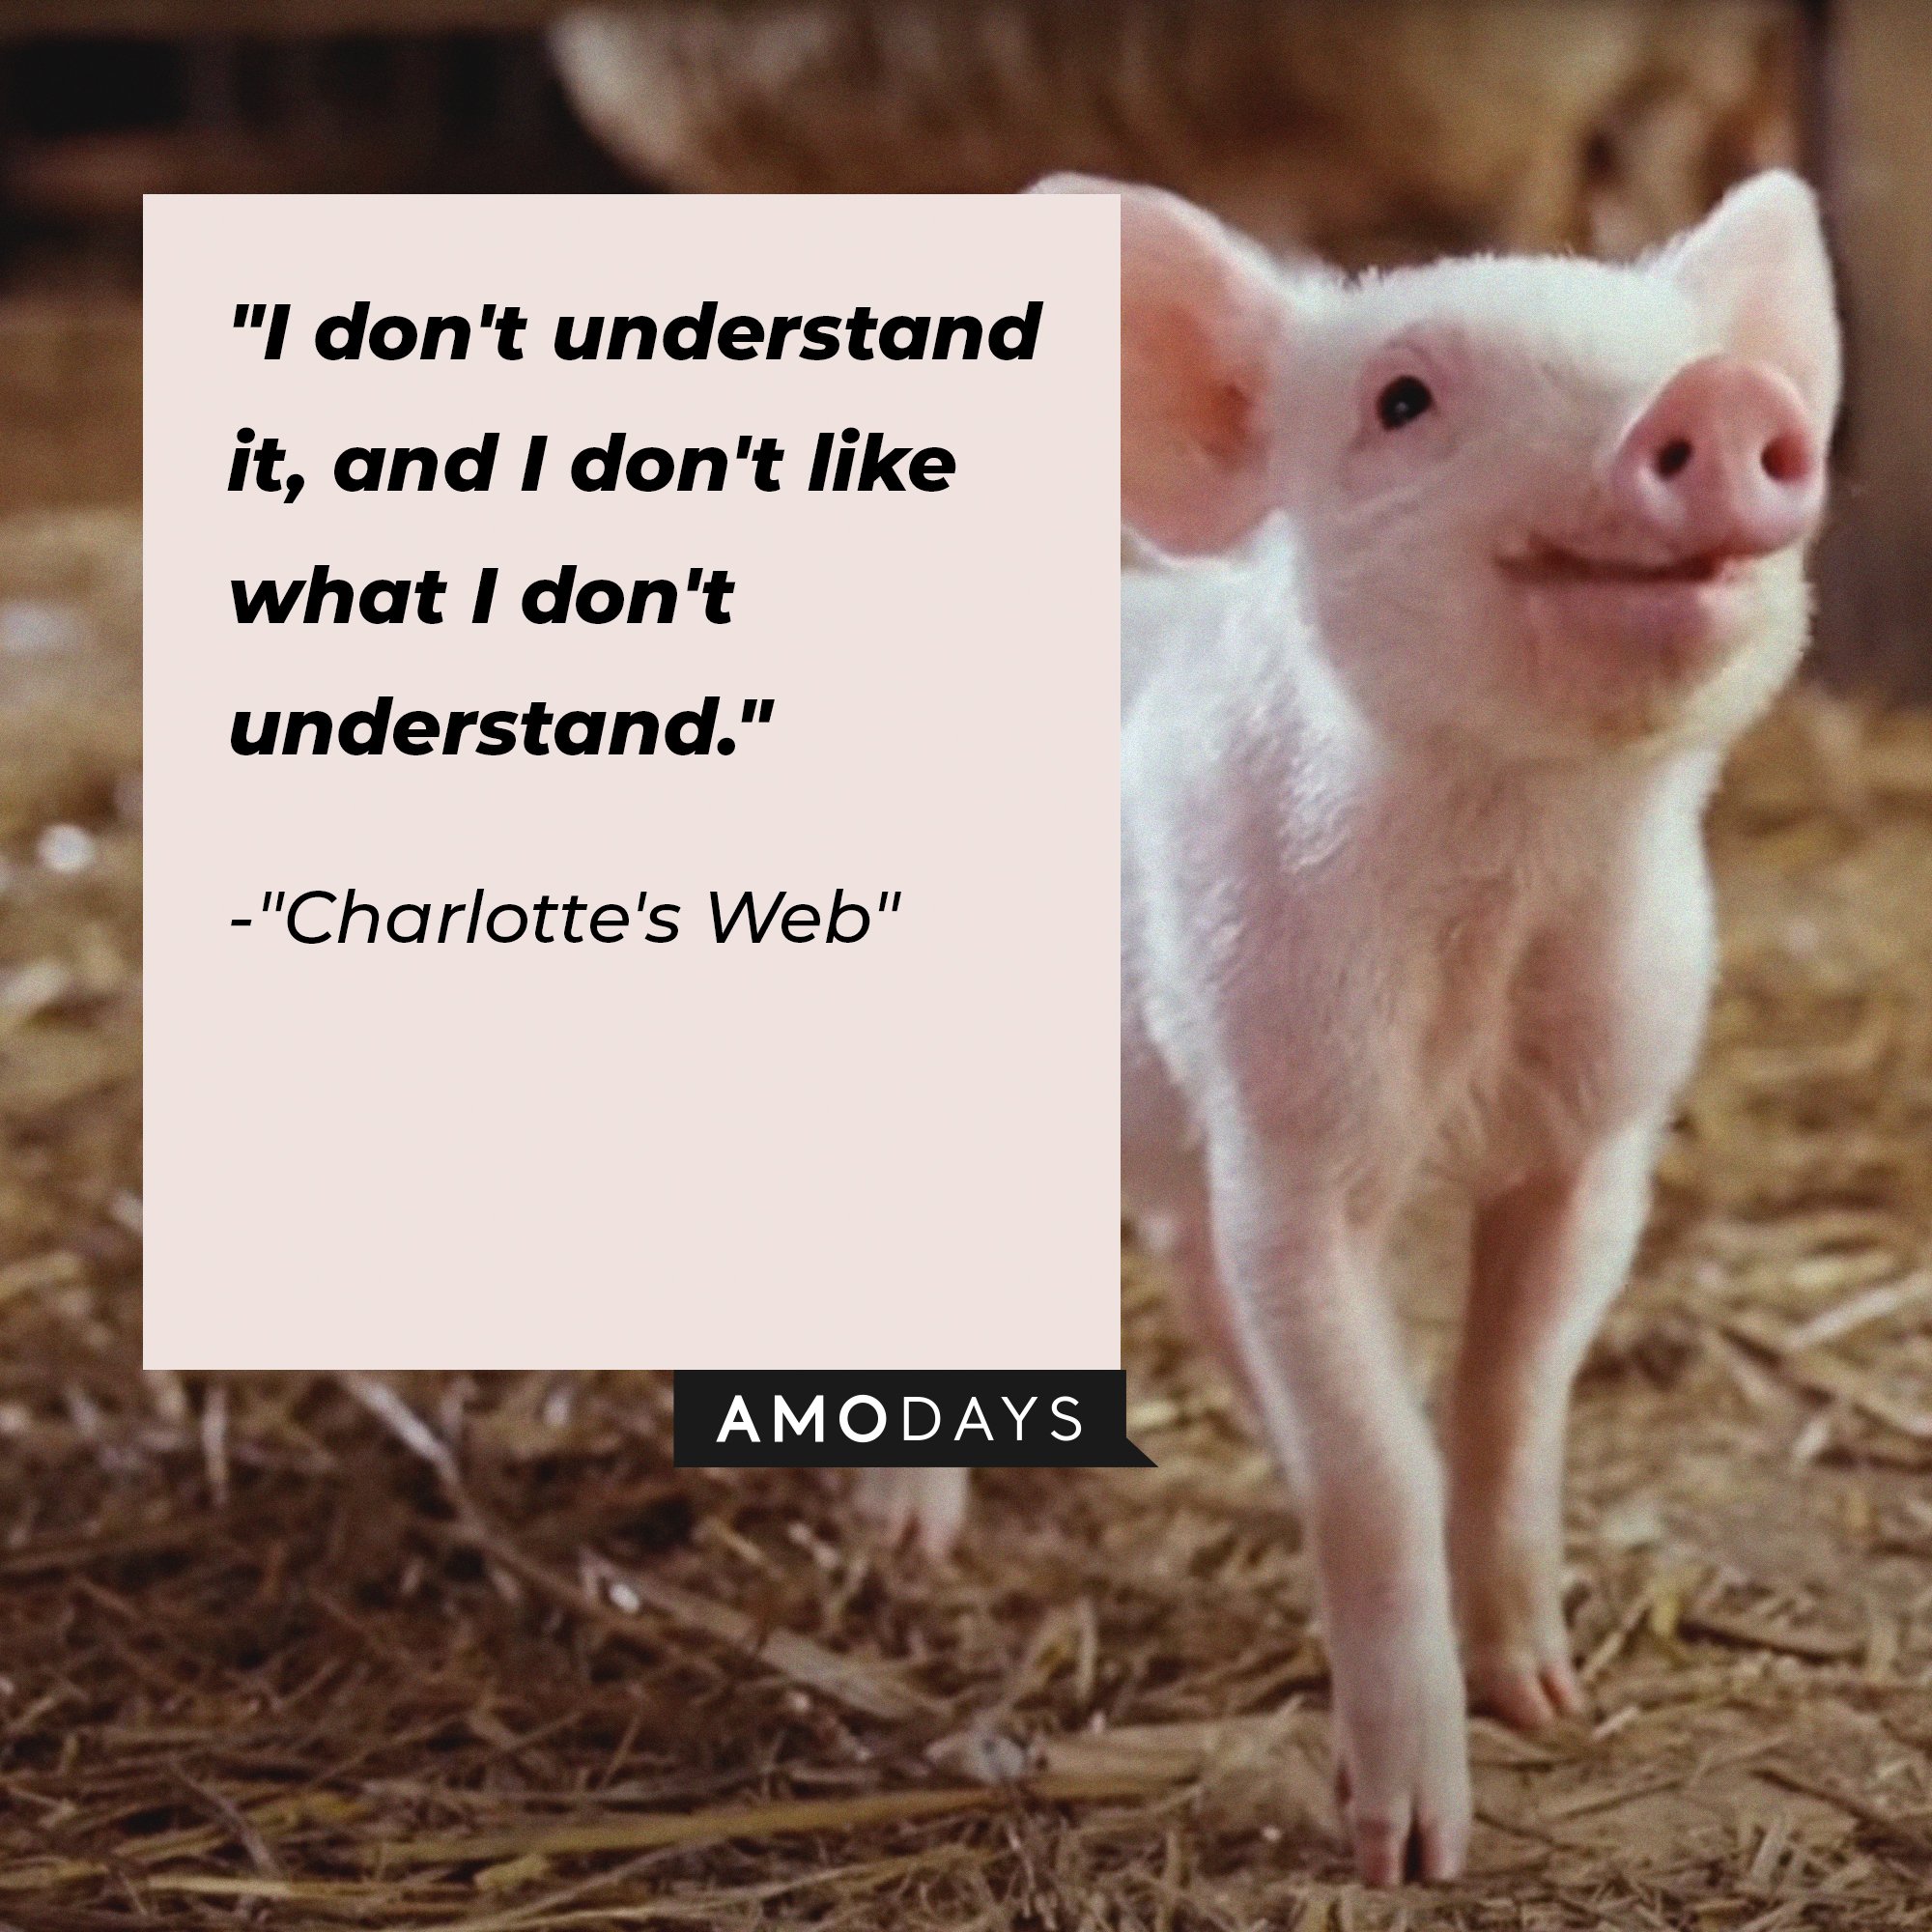 Charlotte's Web quote: "I don't understand it, and I don't like what I don't understand." | Image: AmoDays